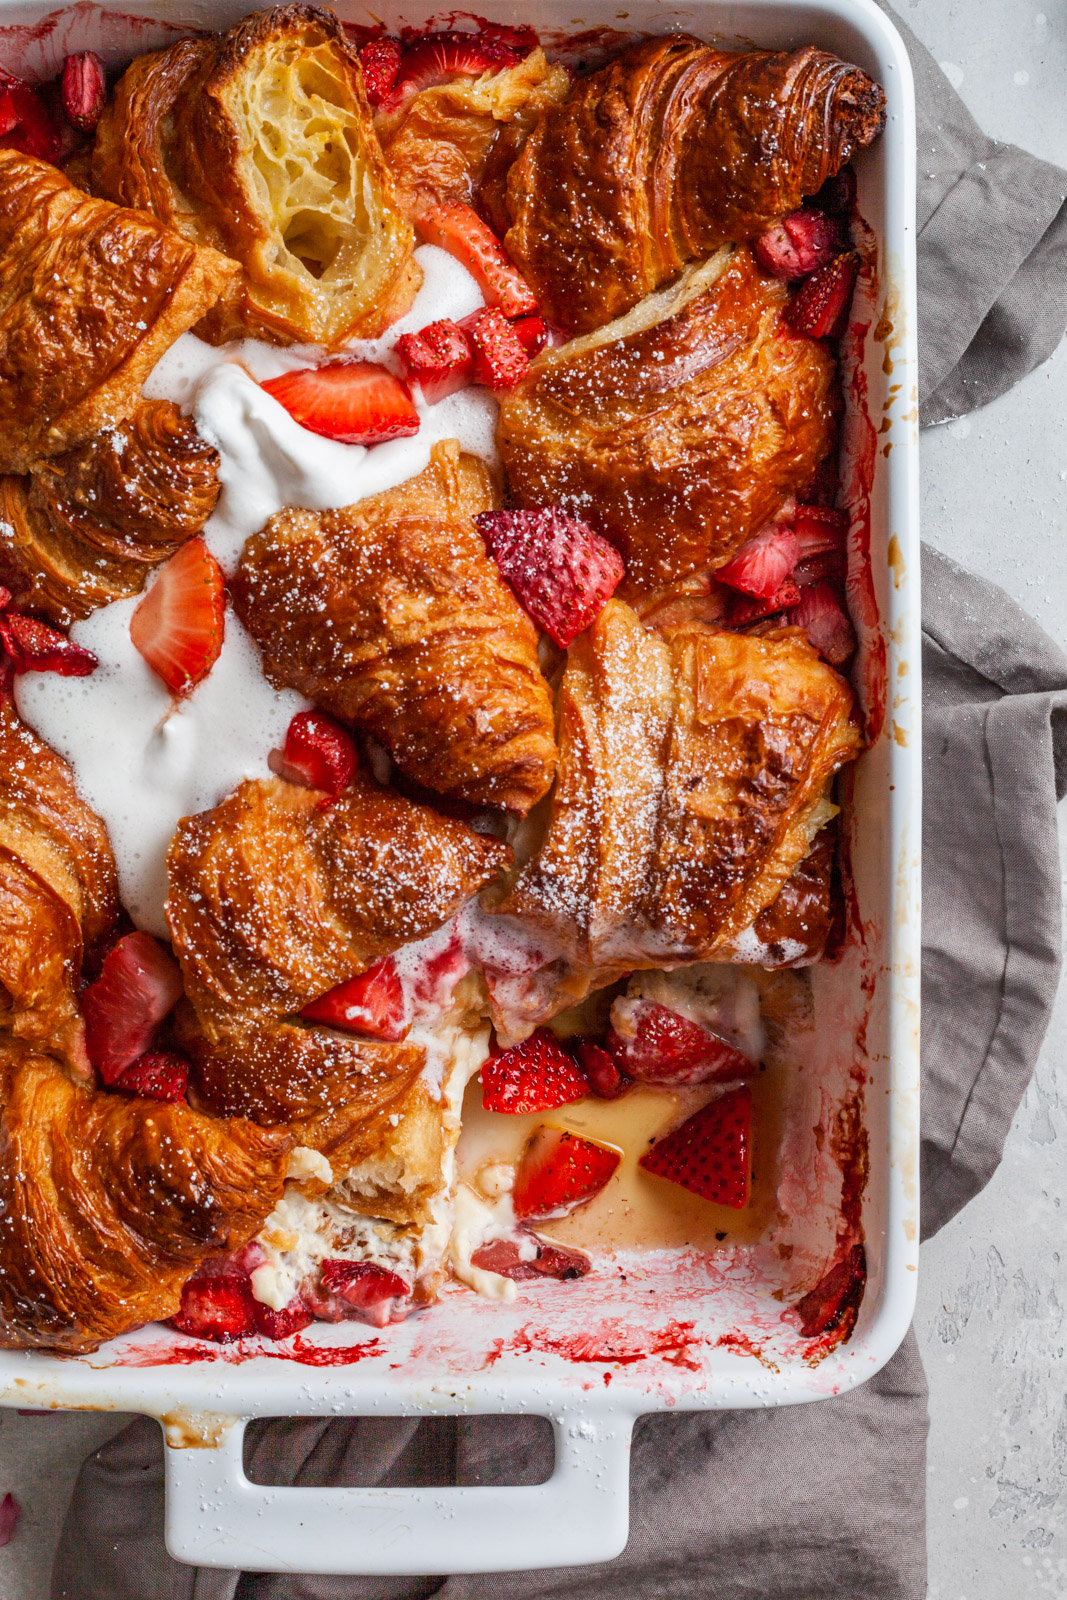 Croissant Baked French Toast With Strawberries and Cream